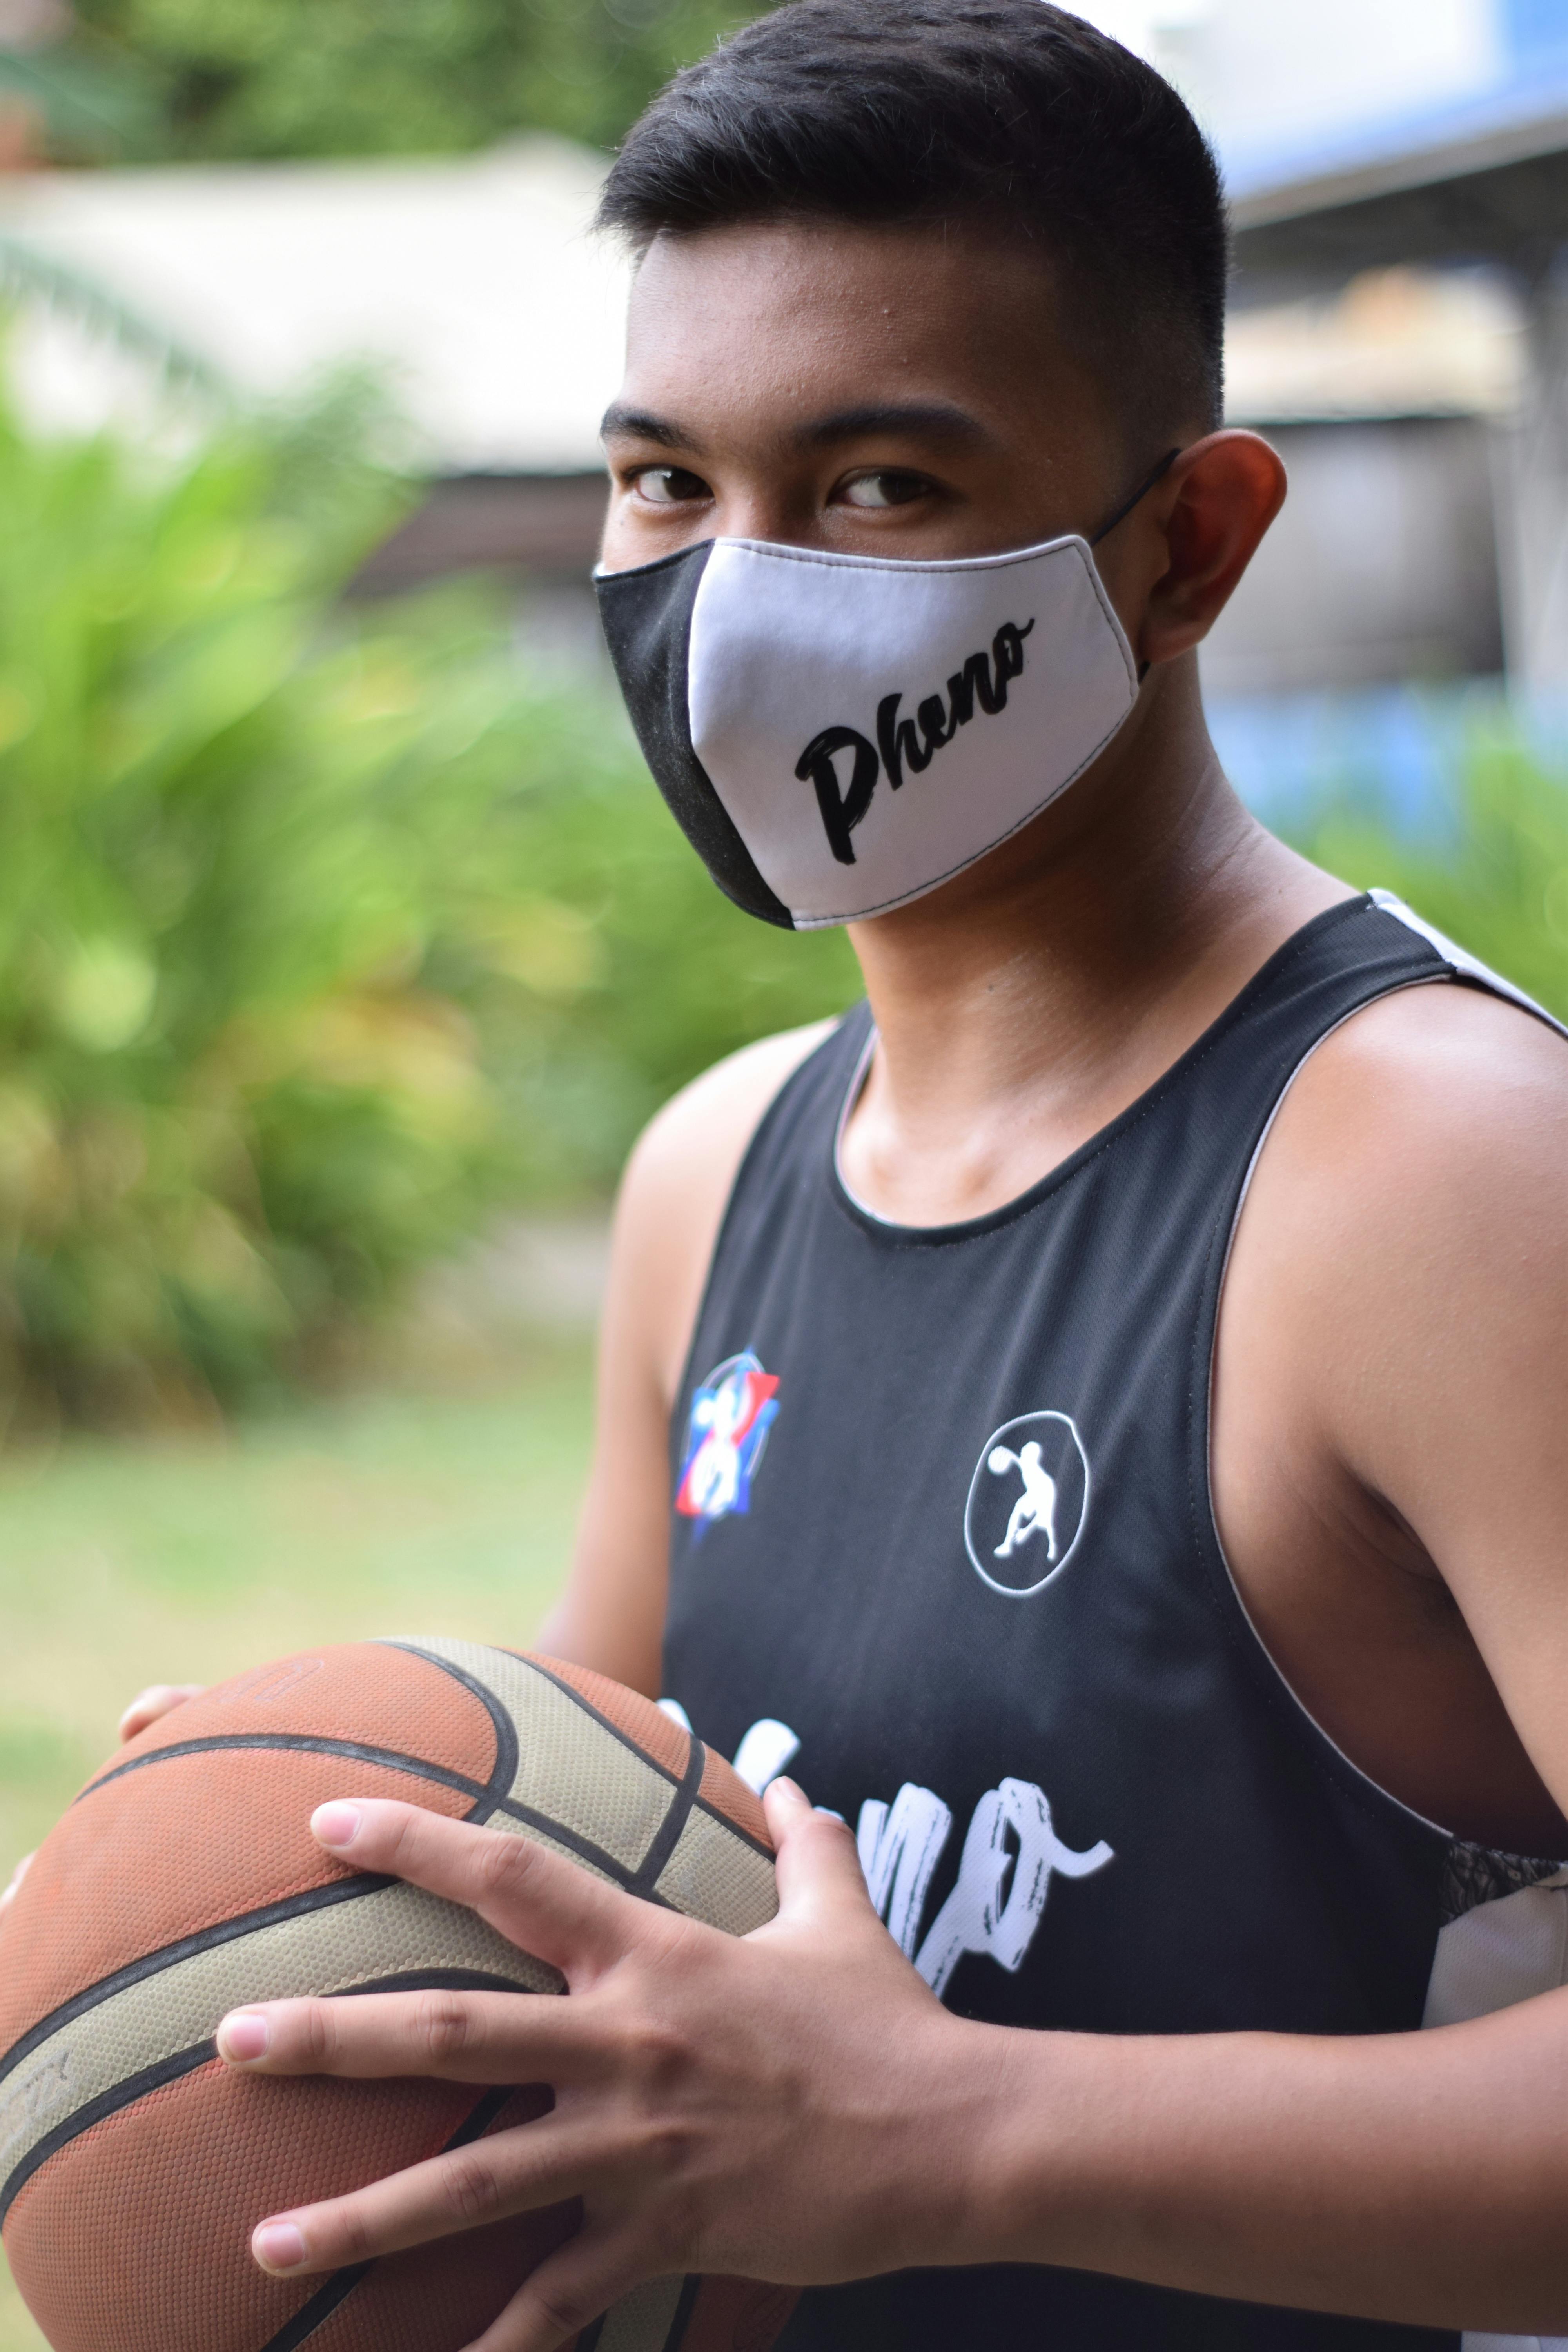 An Athlete Wearing a Face Mask · Free Stock Photo